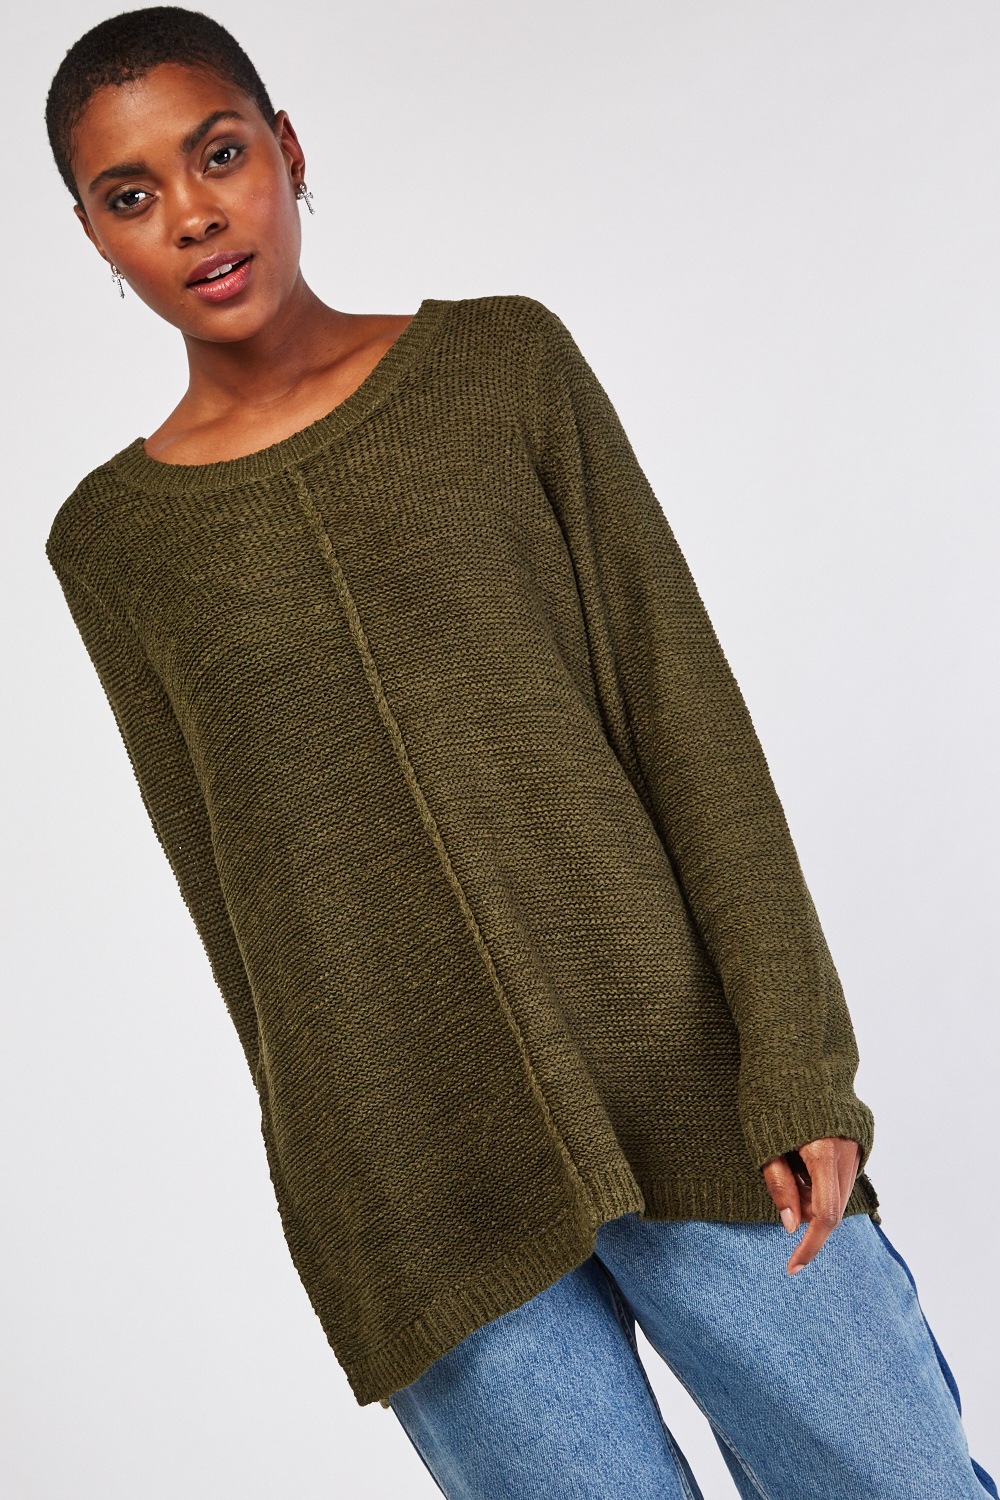 Sheer Knitted Jumper - Just $7